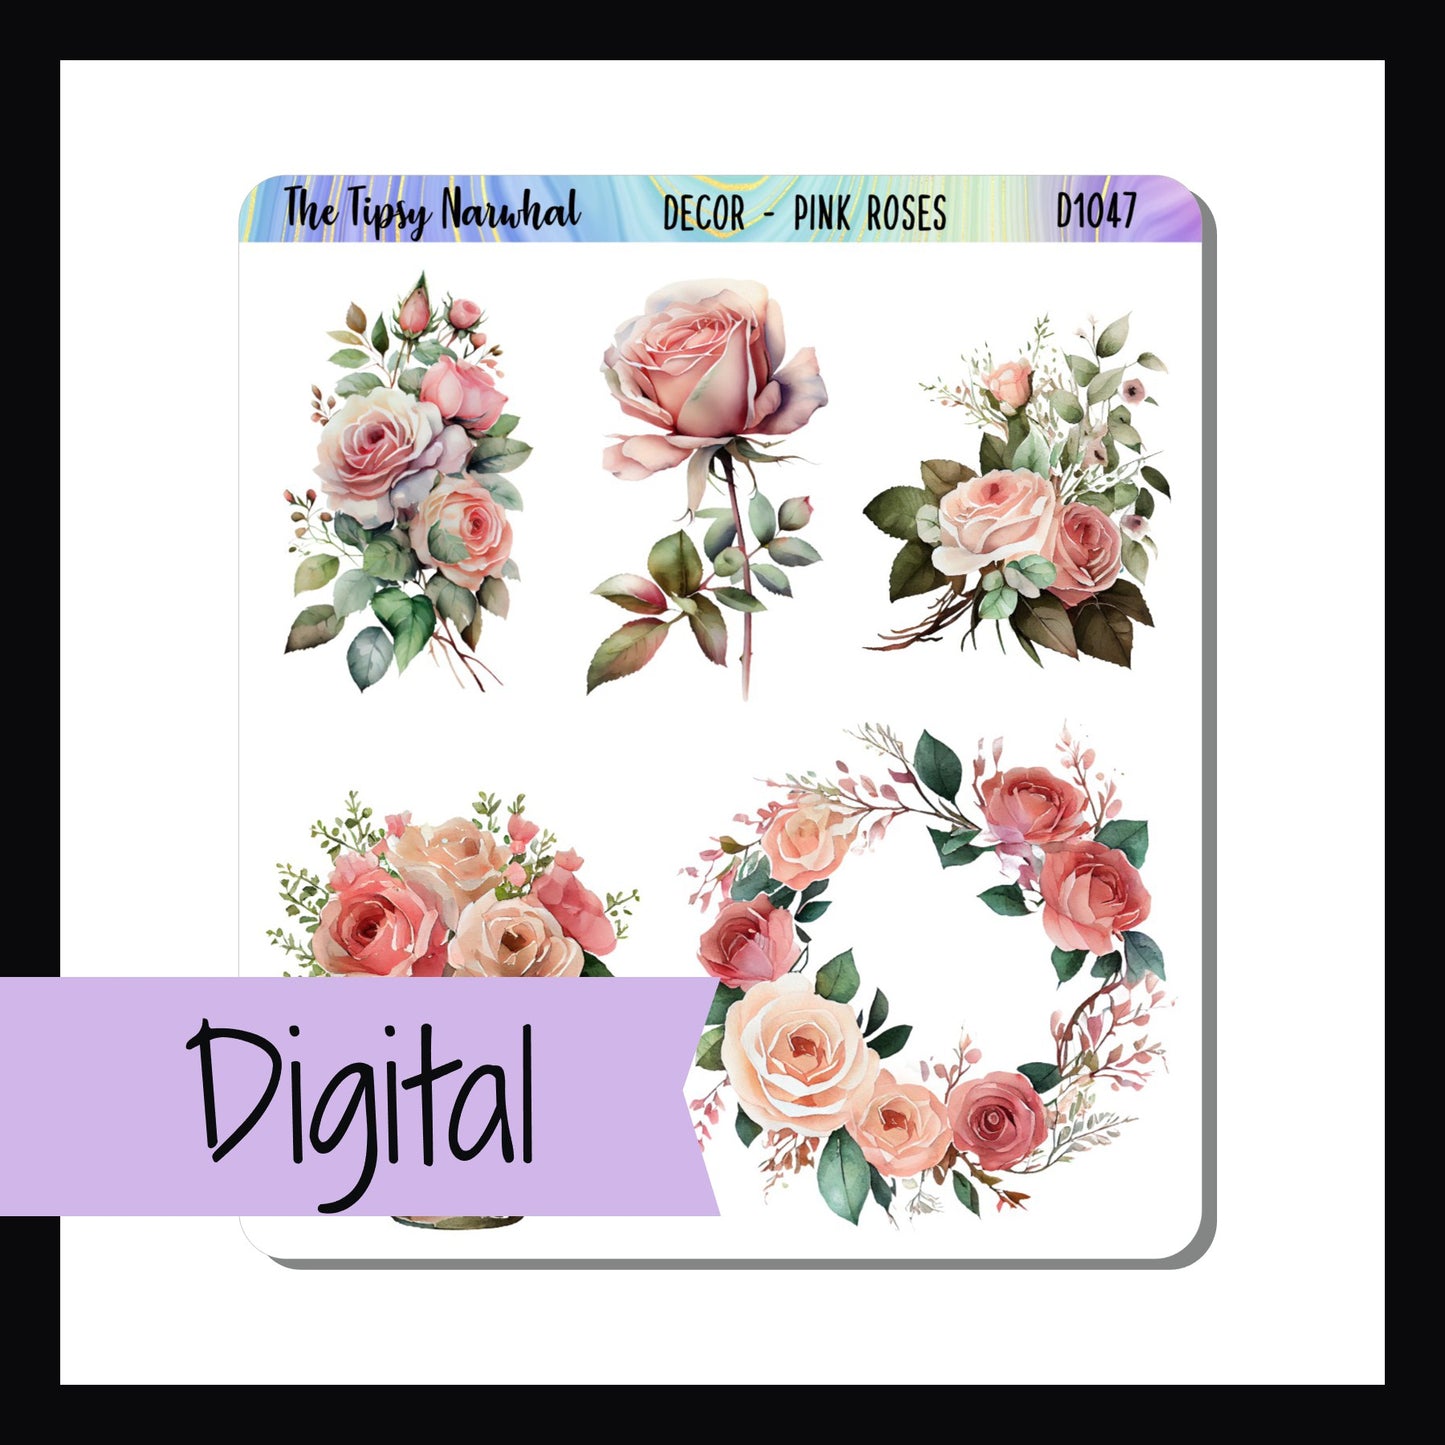 The Digital Pink Roses Decor Sheet is the digital/printable version of our Pink Roses Decor Sheet.  It features 5 stickers of various sizes all depicting pink roses.  Includes a rose wreath, single rose stem, and bouquets.